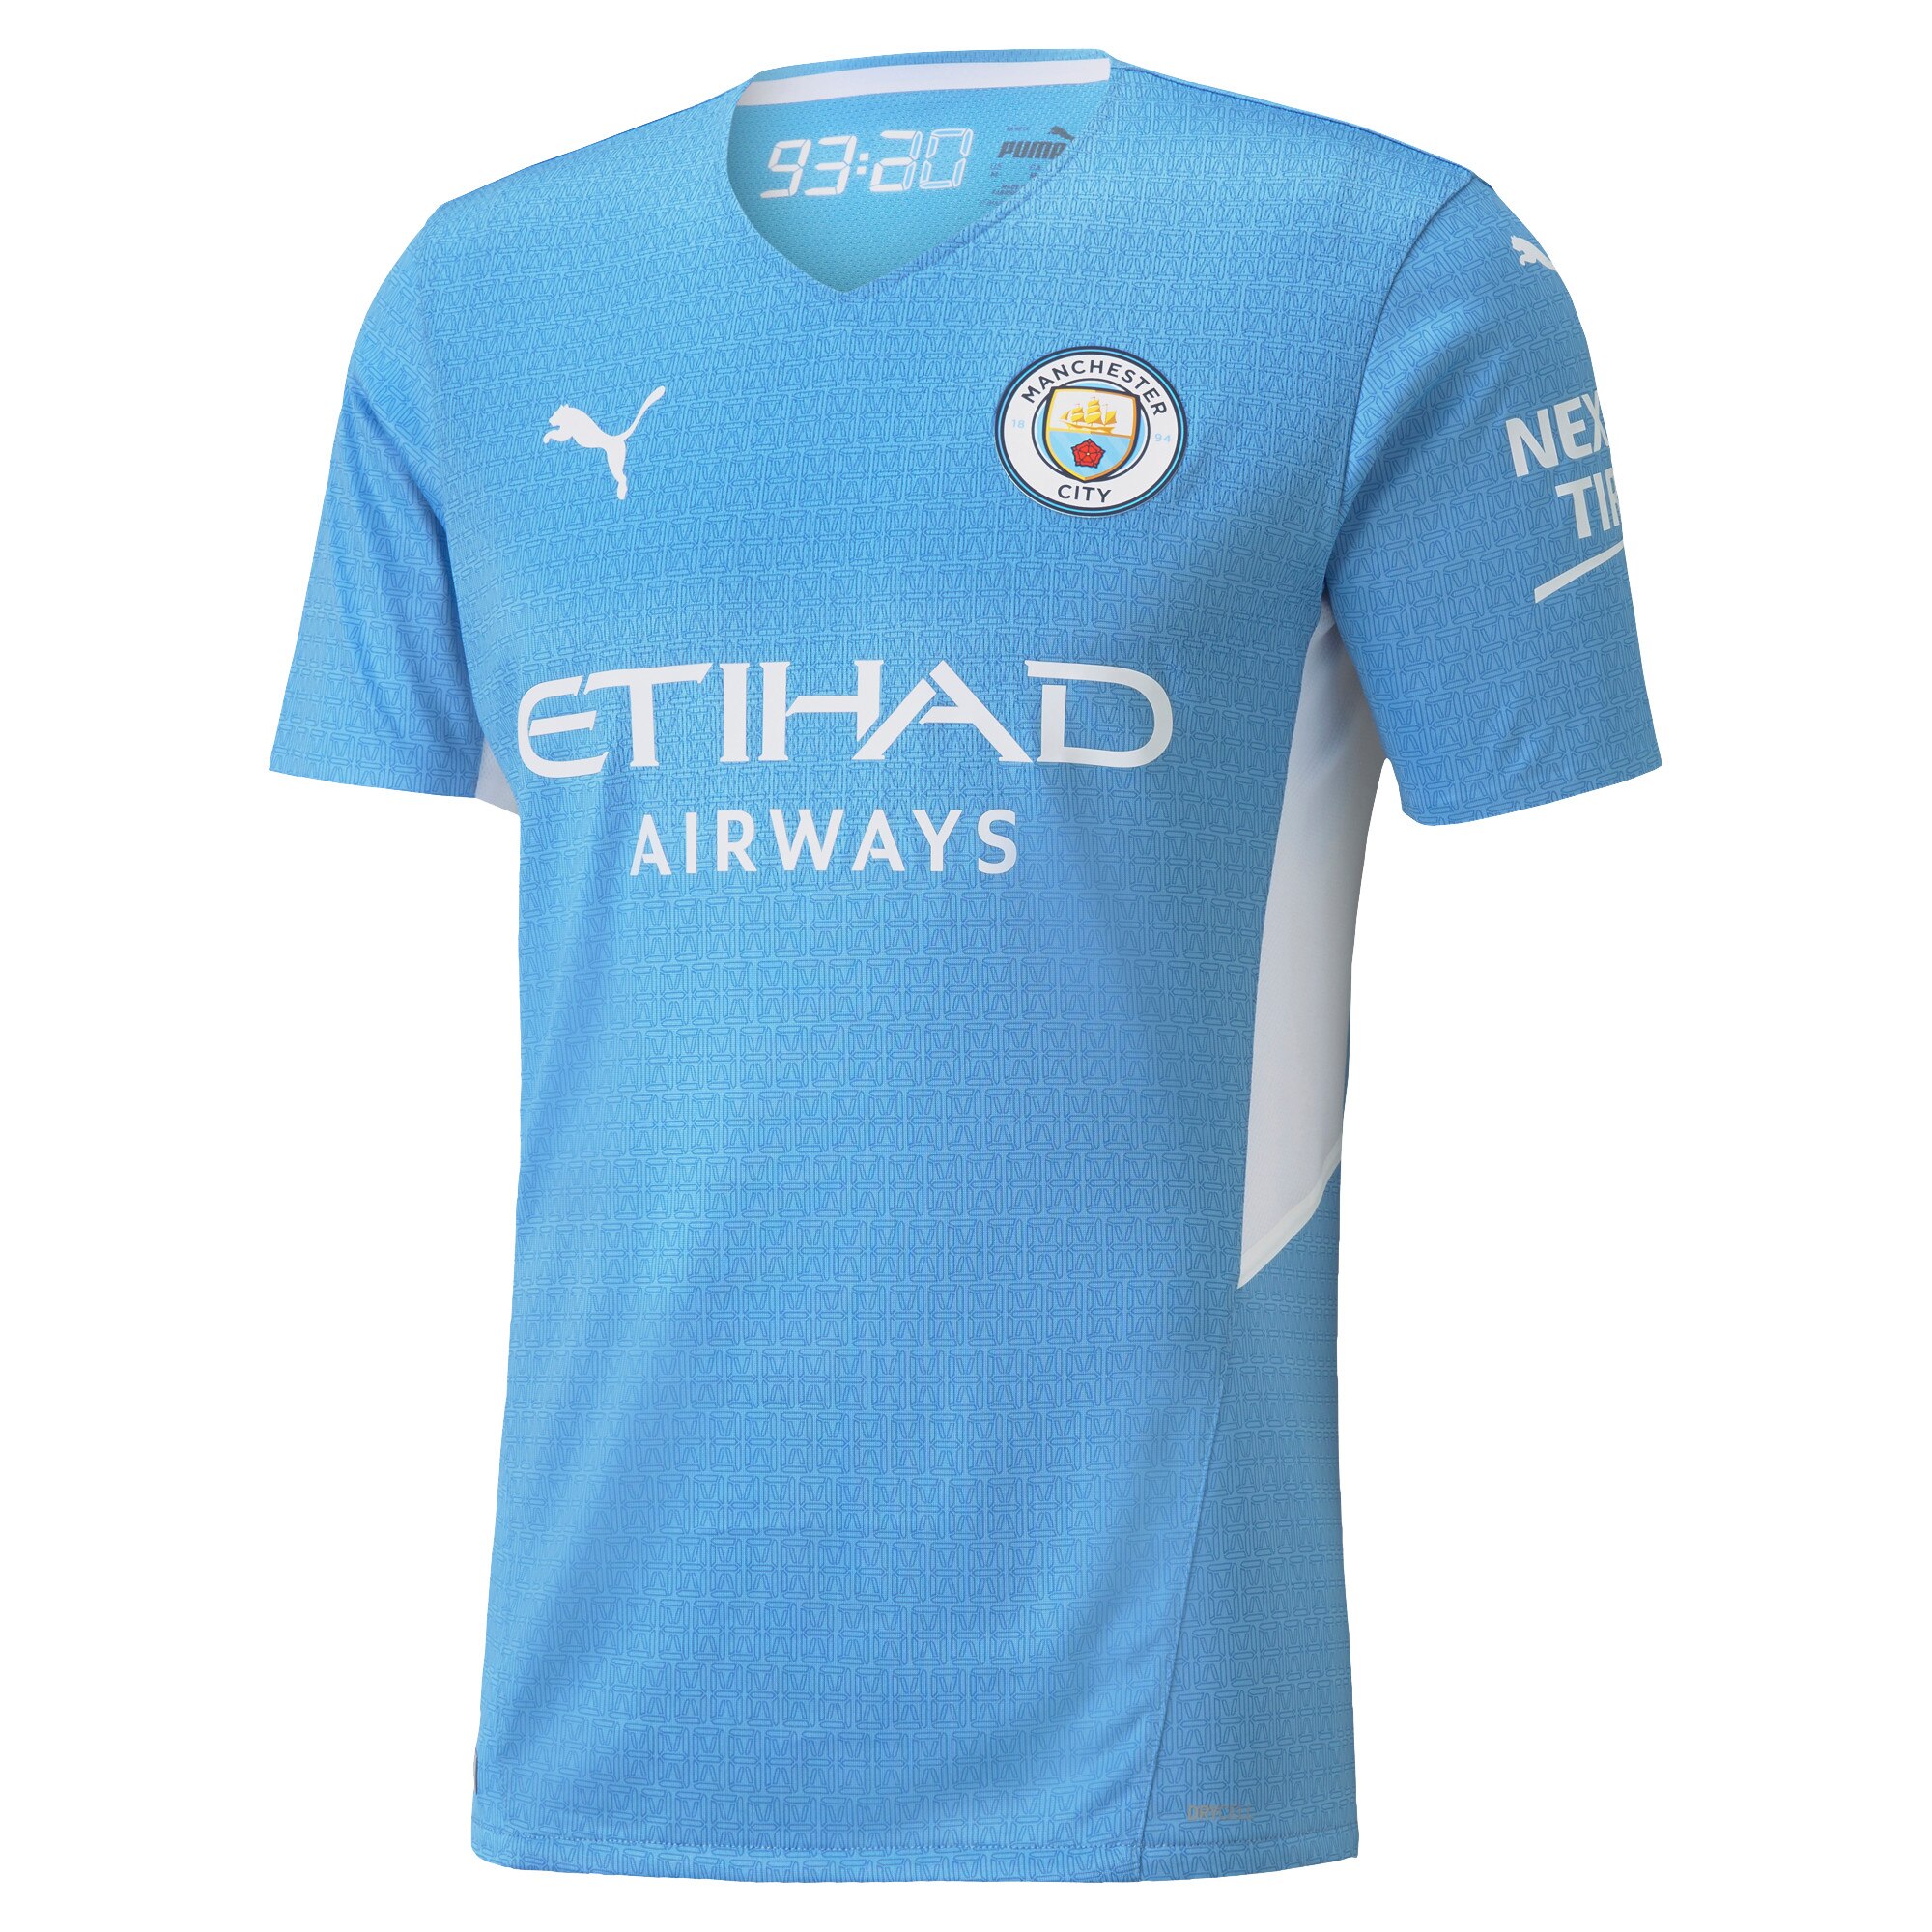 Manchester City Authentic Home Shirt 2021-22 with Rúben 3 printing